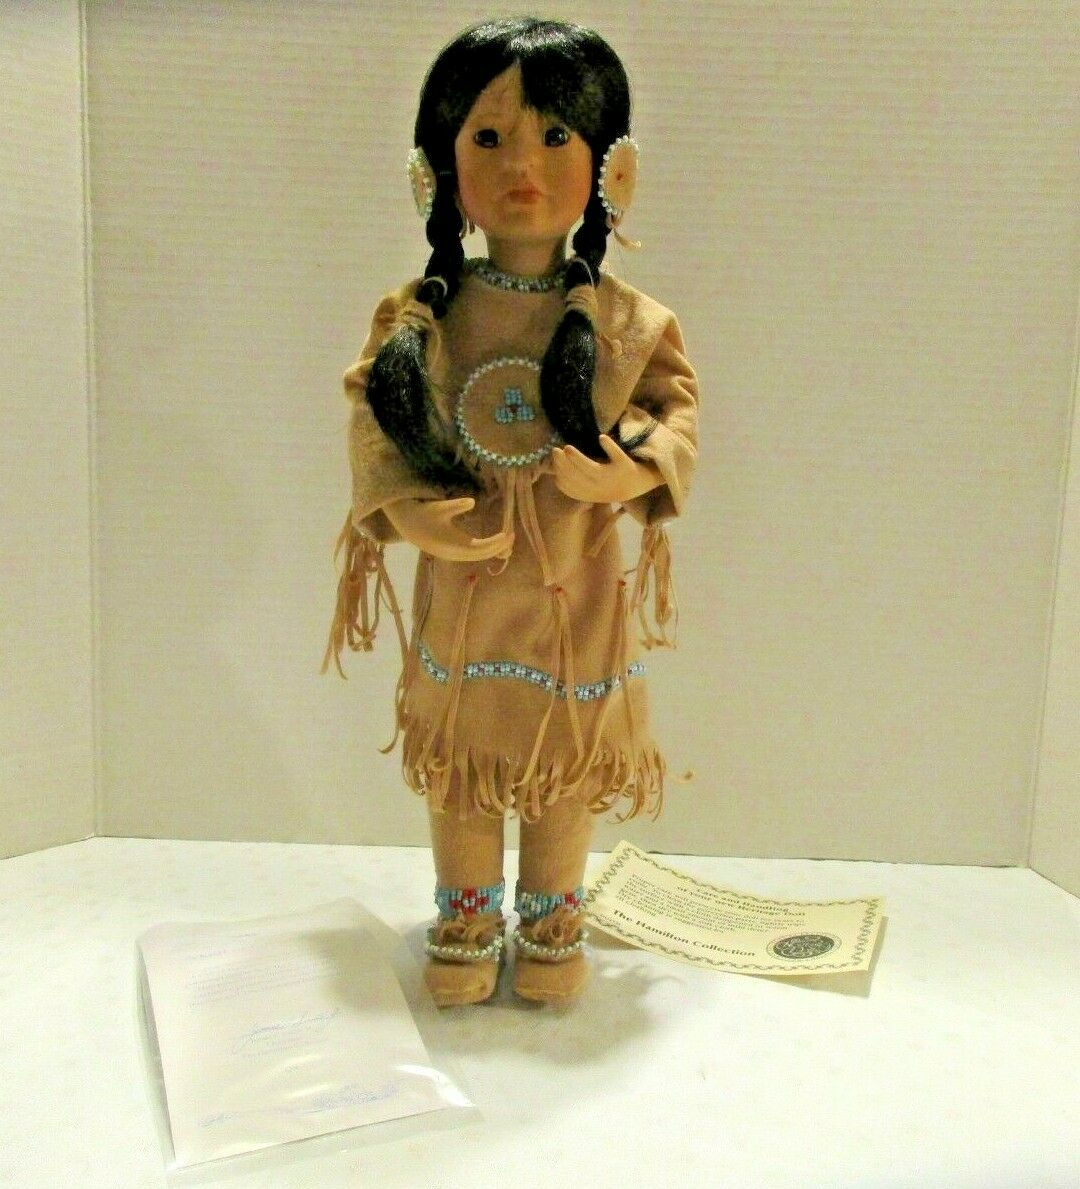 Native American Porcelain Doll 14"t A Gift Of Innocence Hamilton/heritage Doll